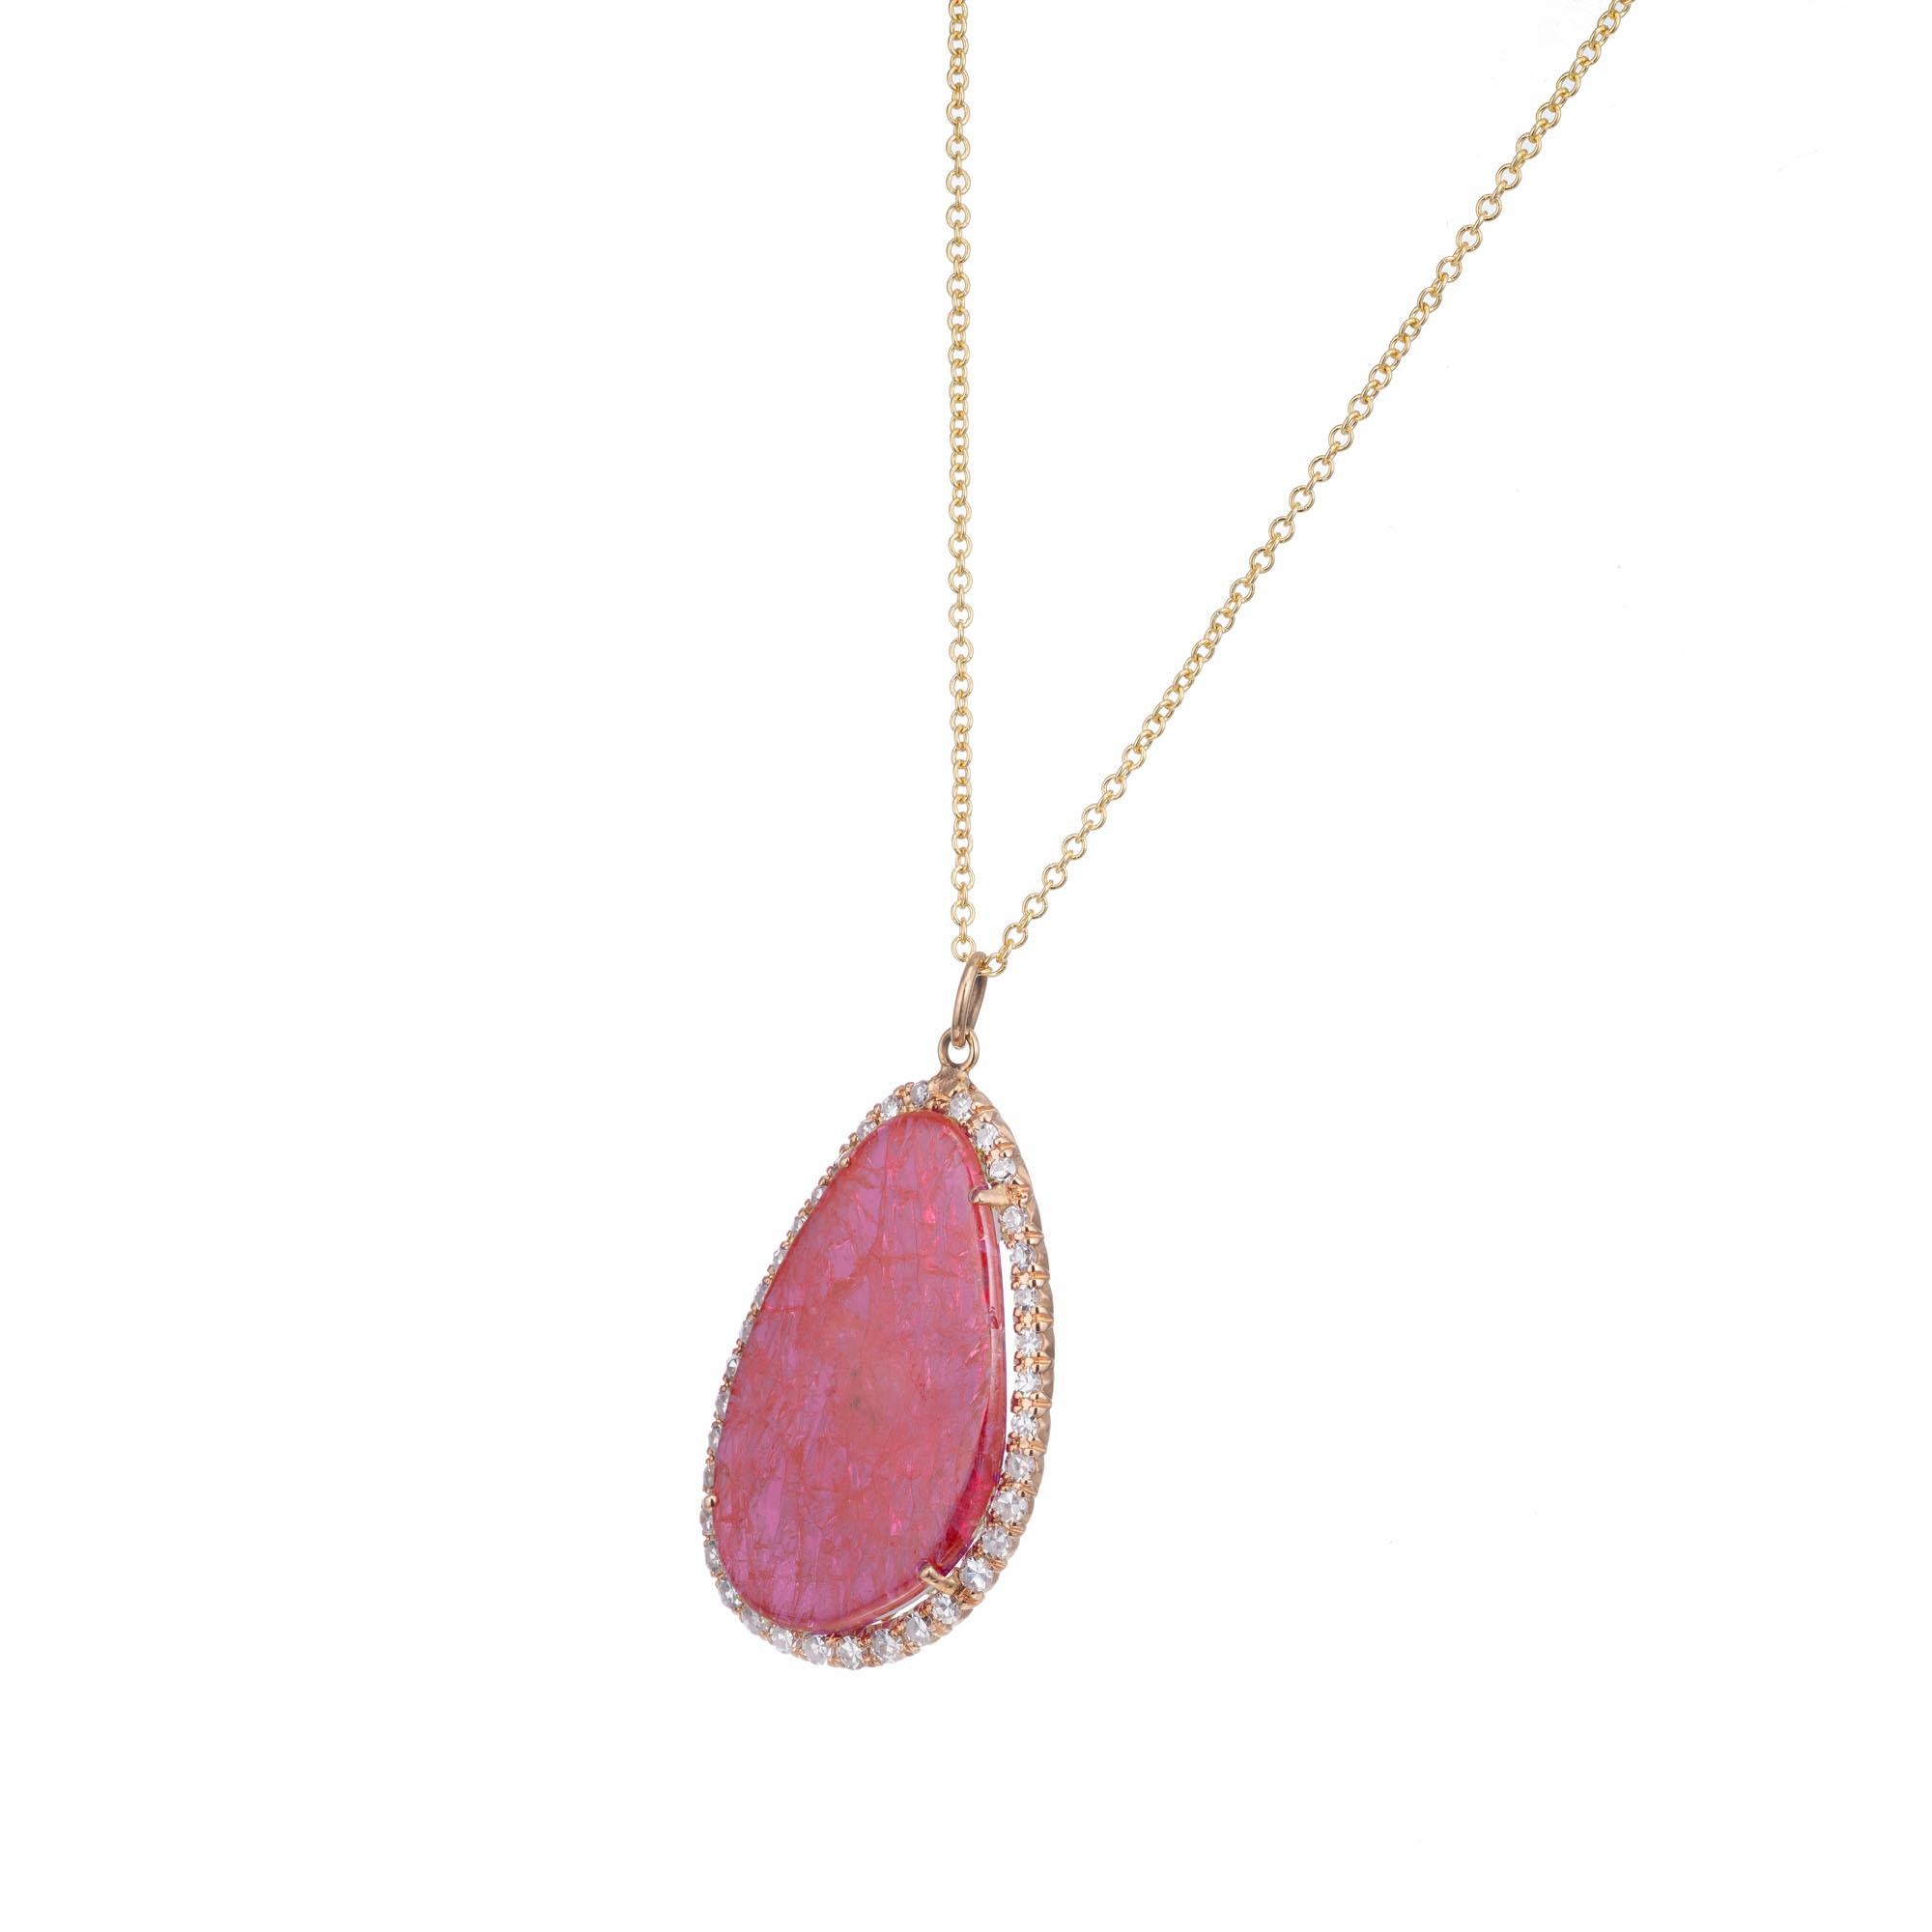 Rare natural untreated bright purplish pink sapphire slice and diamond pendant necklace. GIA certified center slice with a halo of 36 round accent diamonds set in 18k yellow gold.

1 freeform purplish pink cabochon sapphire MI, approx. 6.00cts GIA